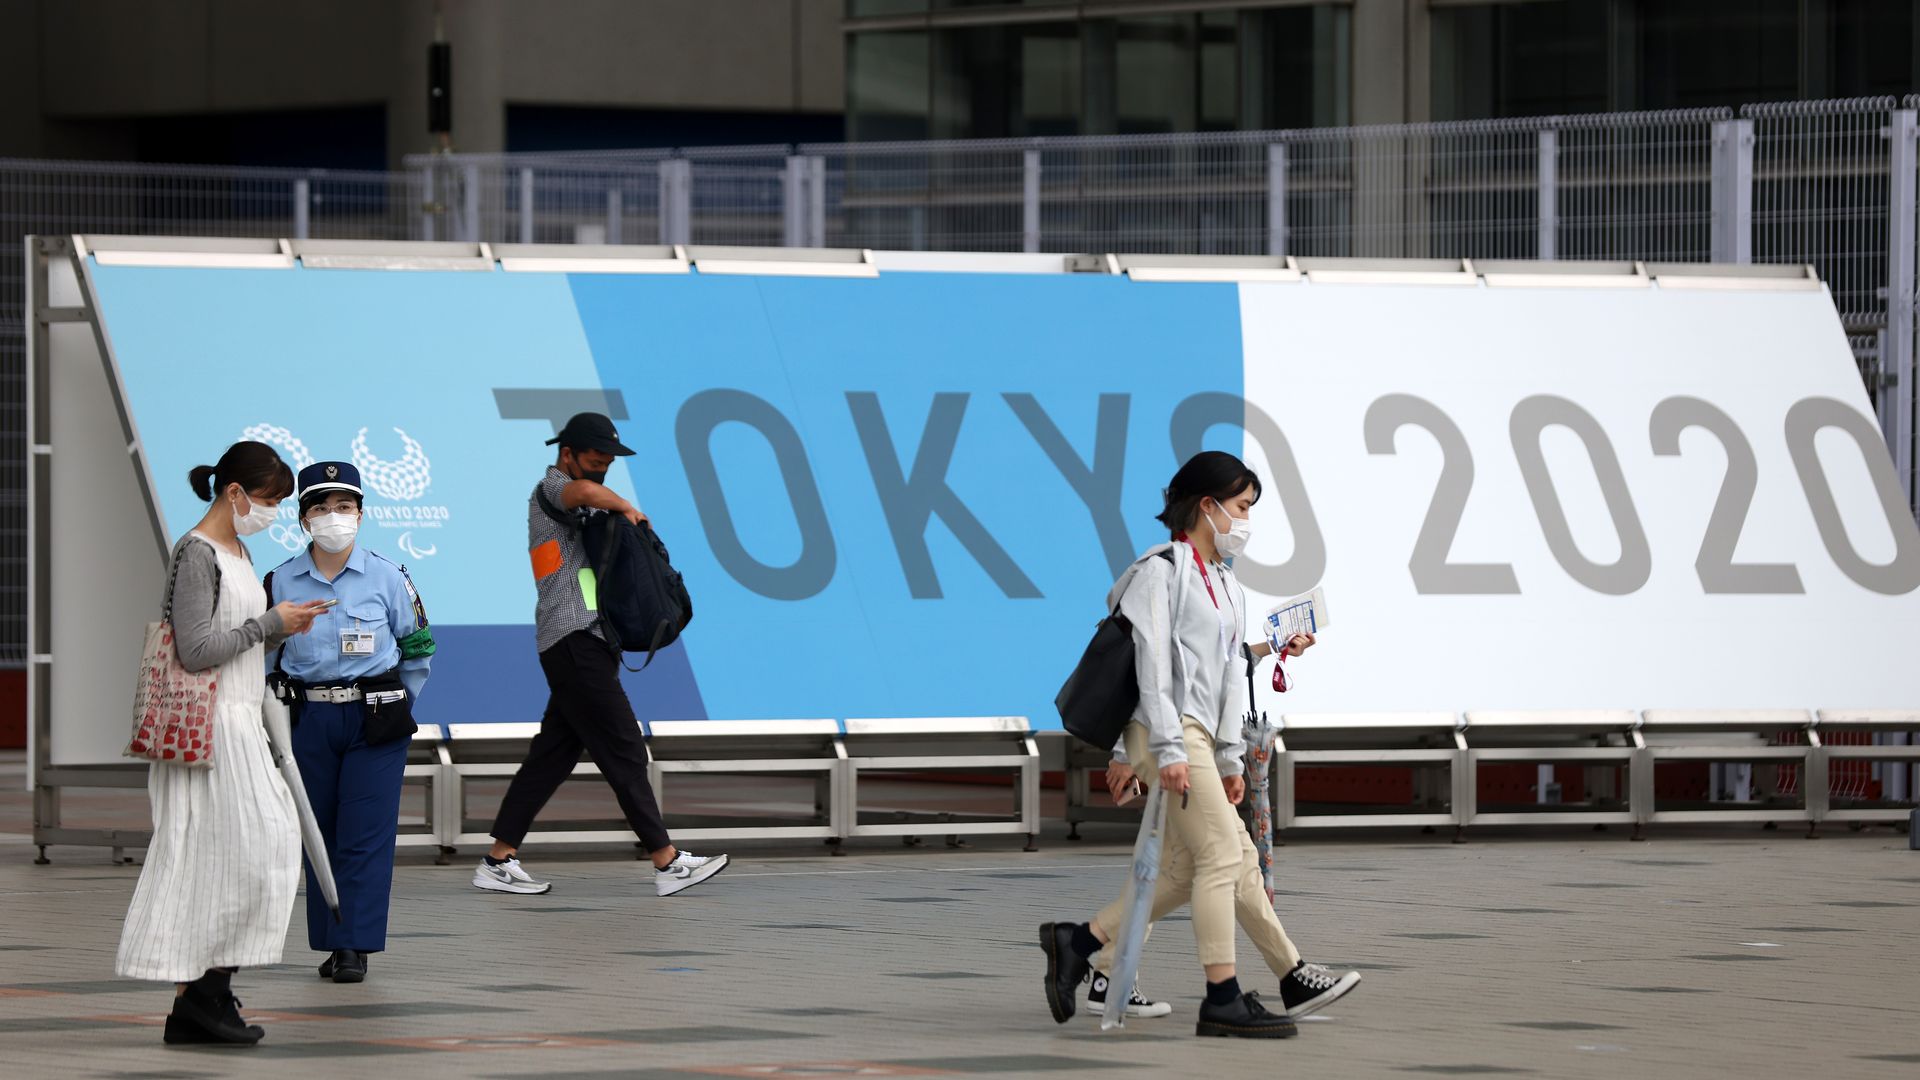 A security guard stands outside the main entrance during the official opening of the Tokyo 2020 Main Press Center ahead of the Tokyo Olympic Games on July 01, 2021.